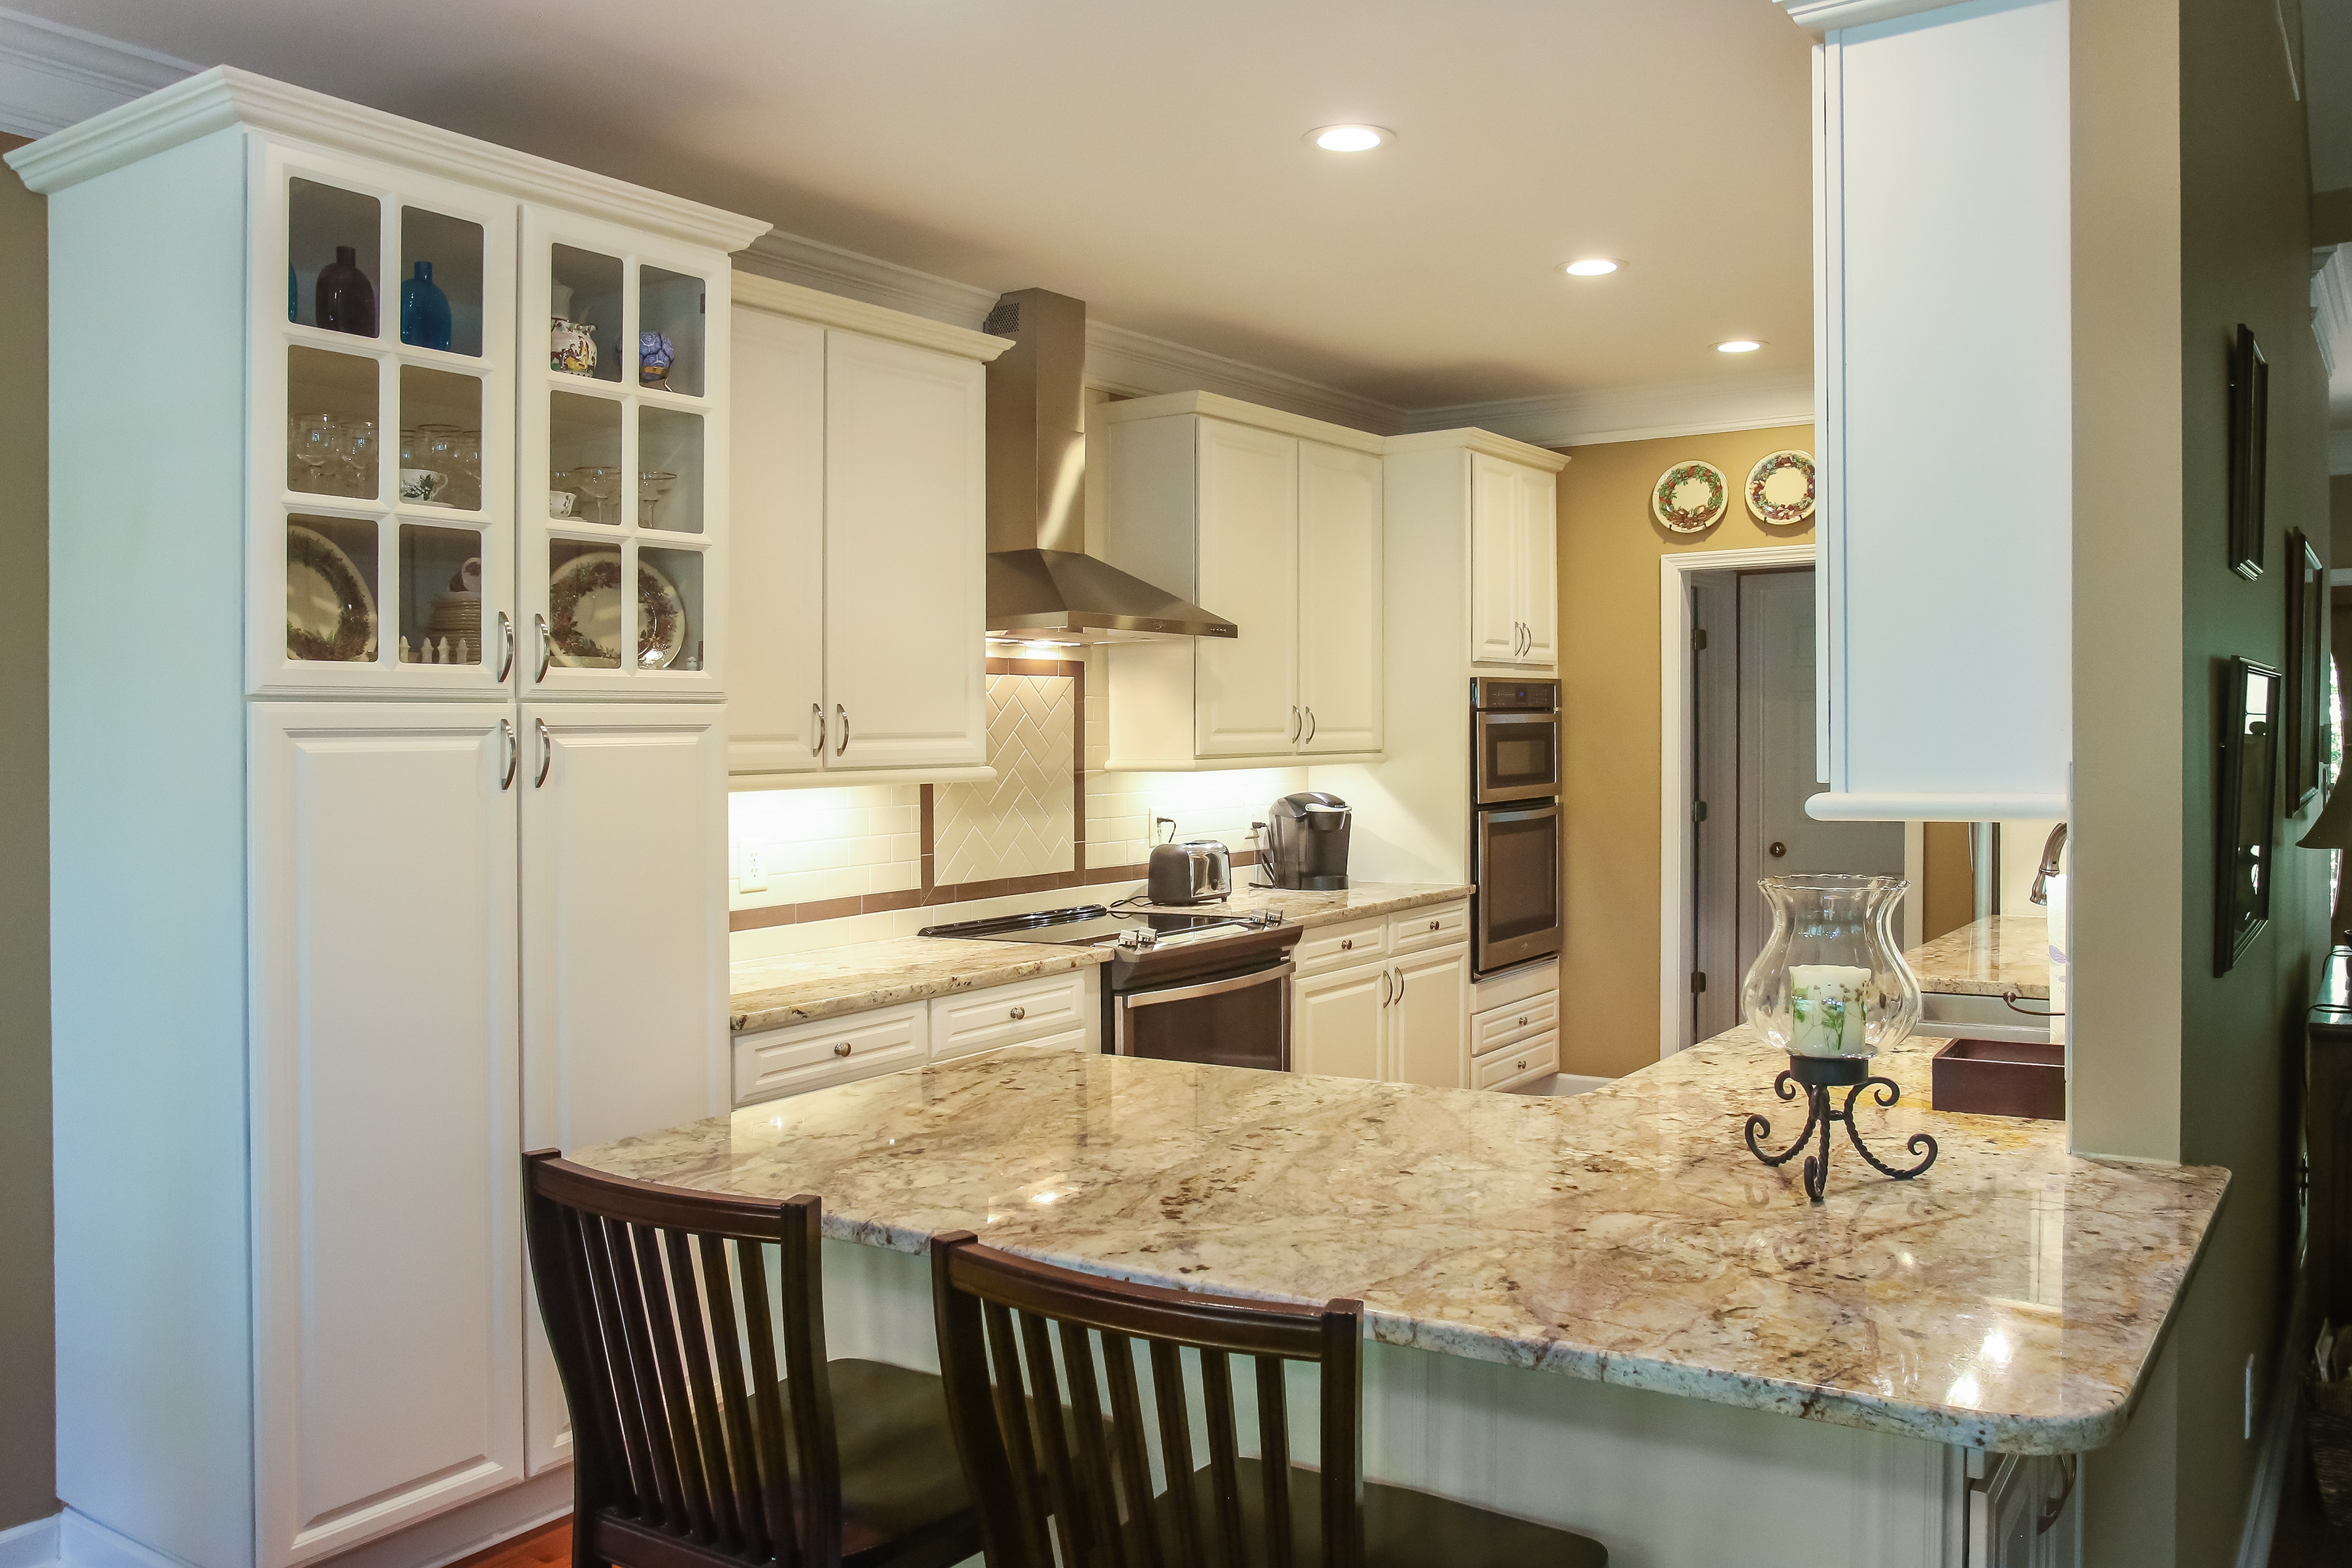 Kitchen Remodel Contractor, Kitchen Remodel Cost, Kitchen Remodeling